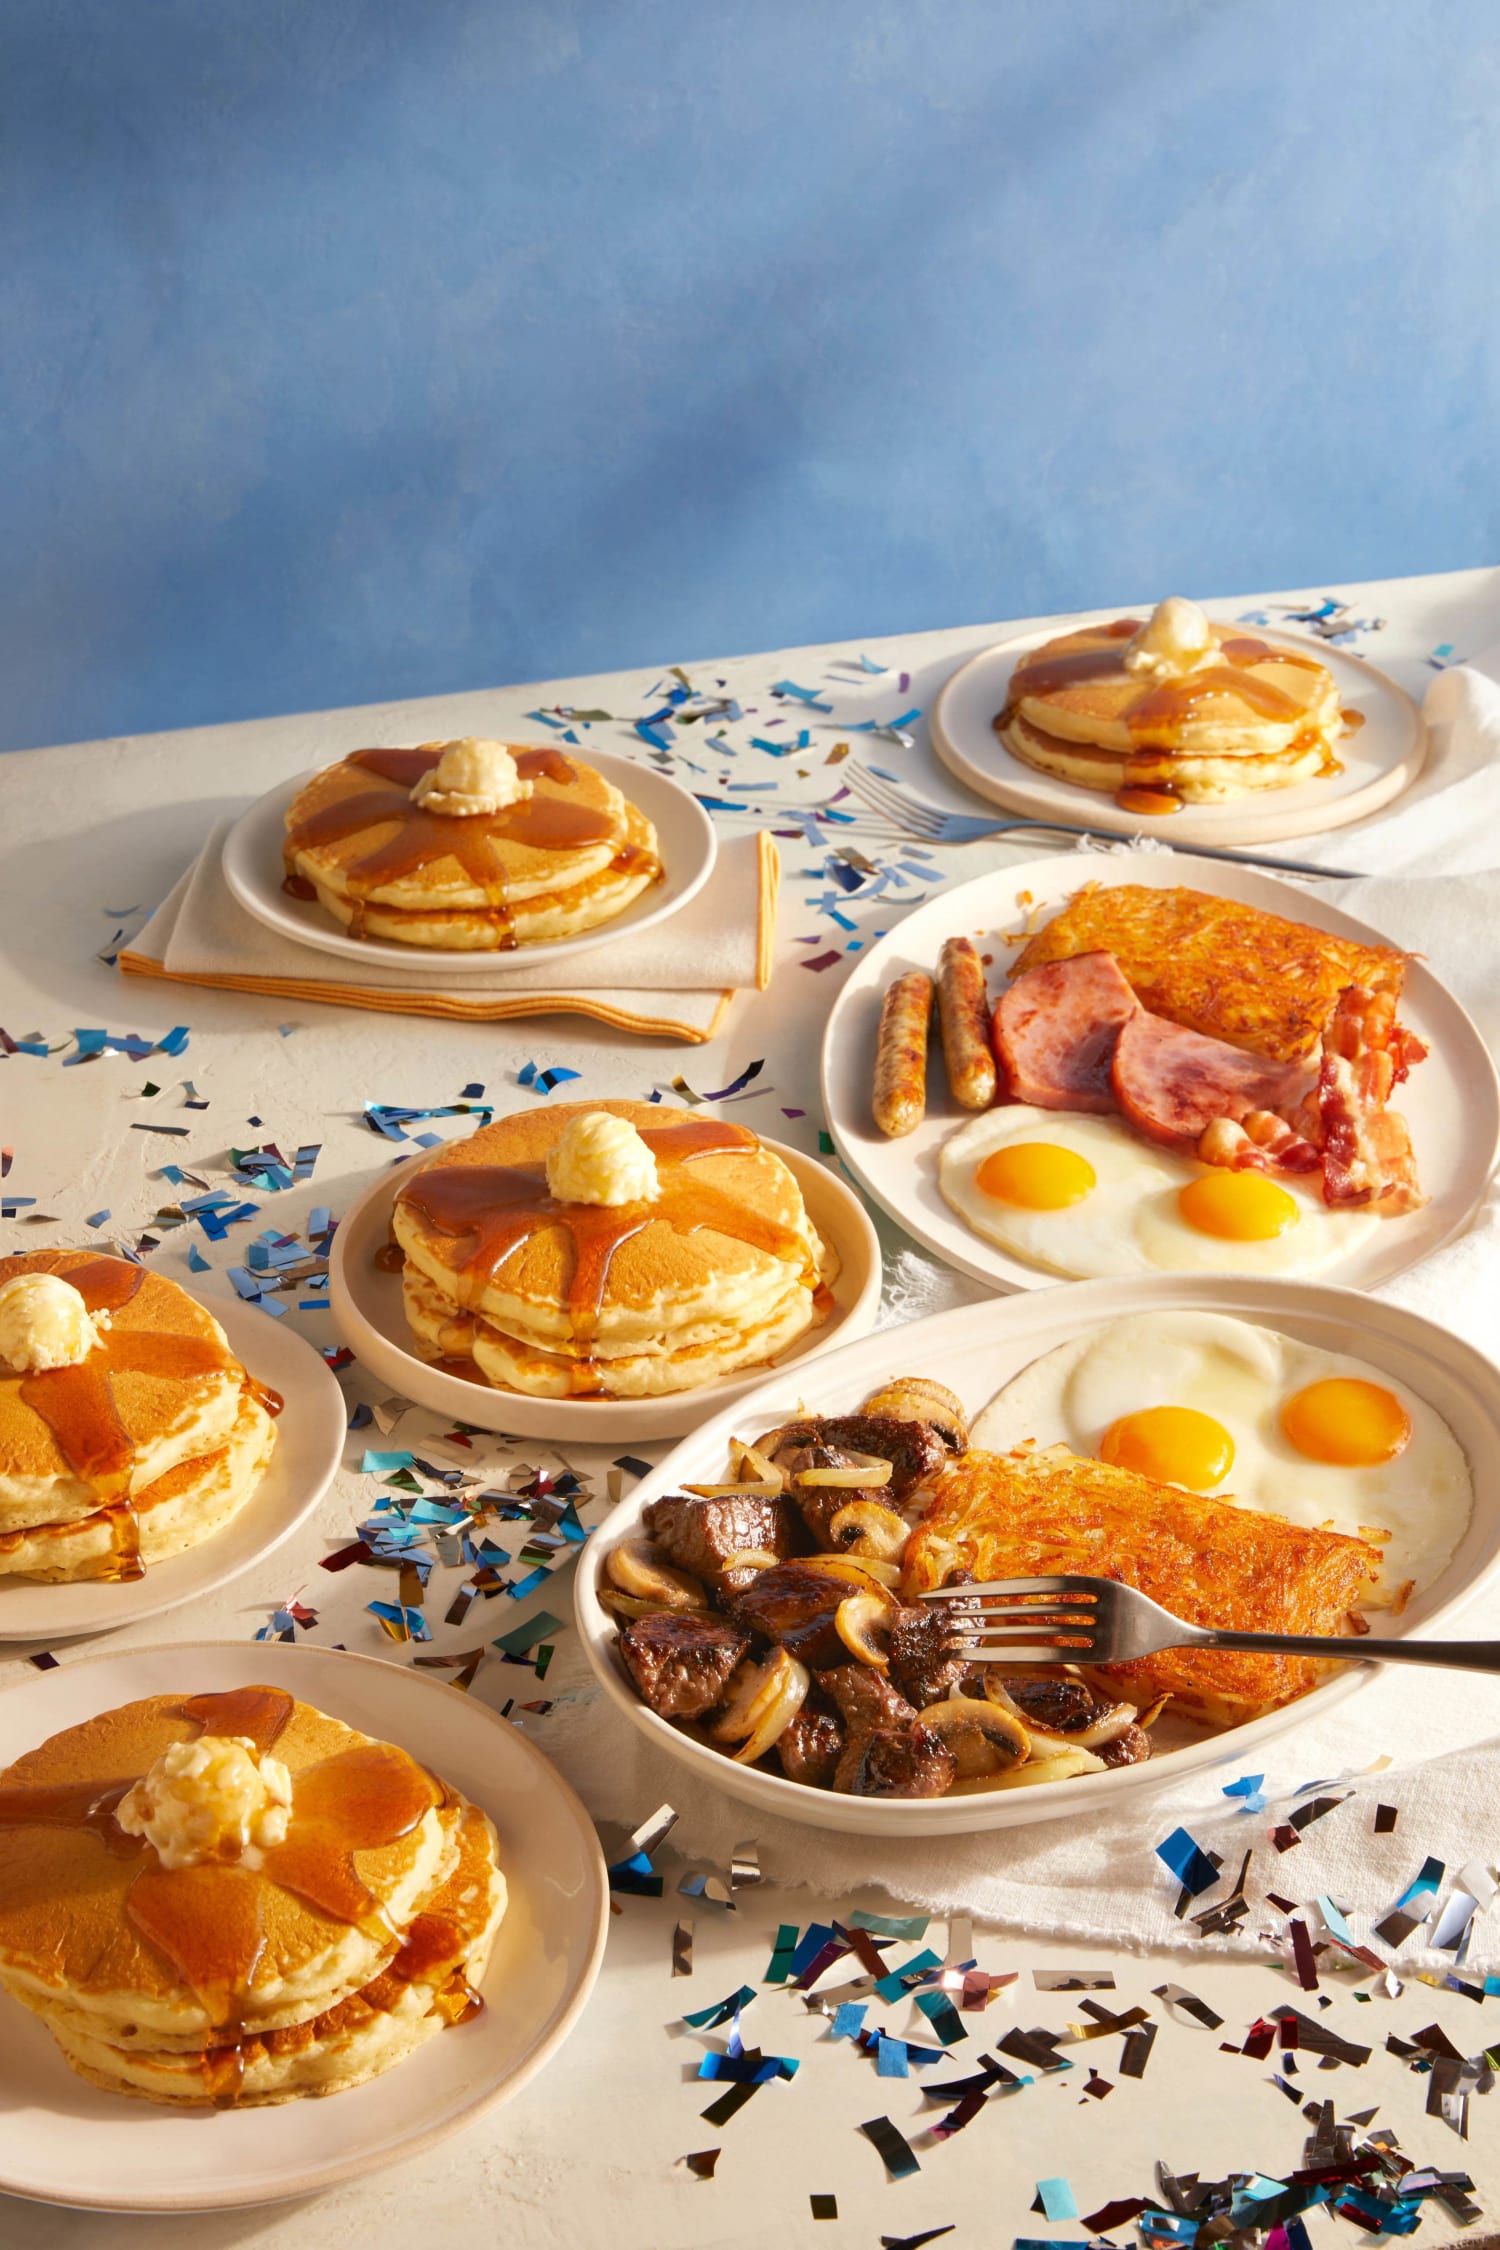 You Can Get All-You-Can-Eat Pancakes for $5 at IHOP This Month